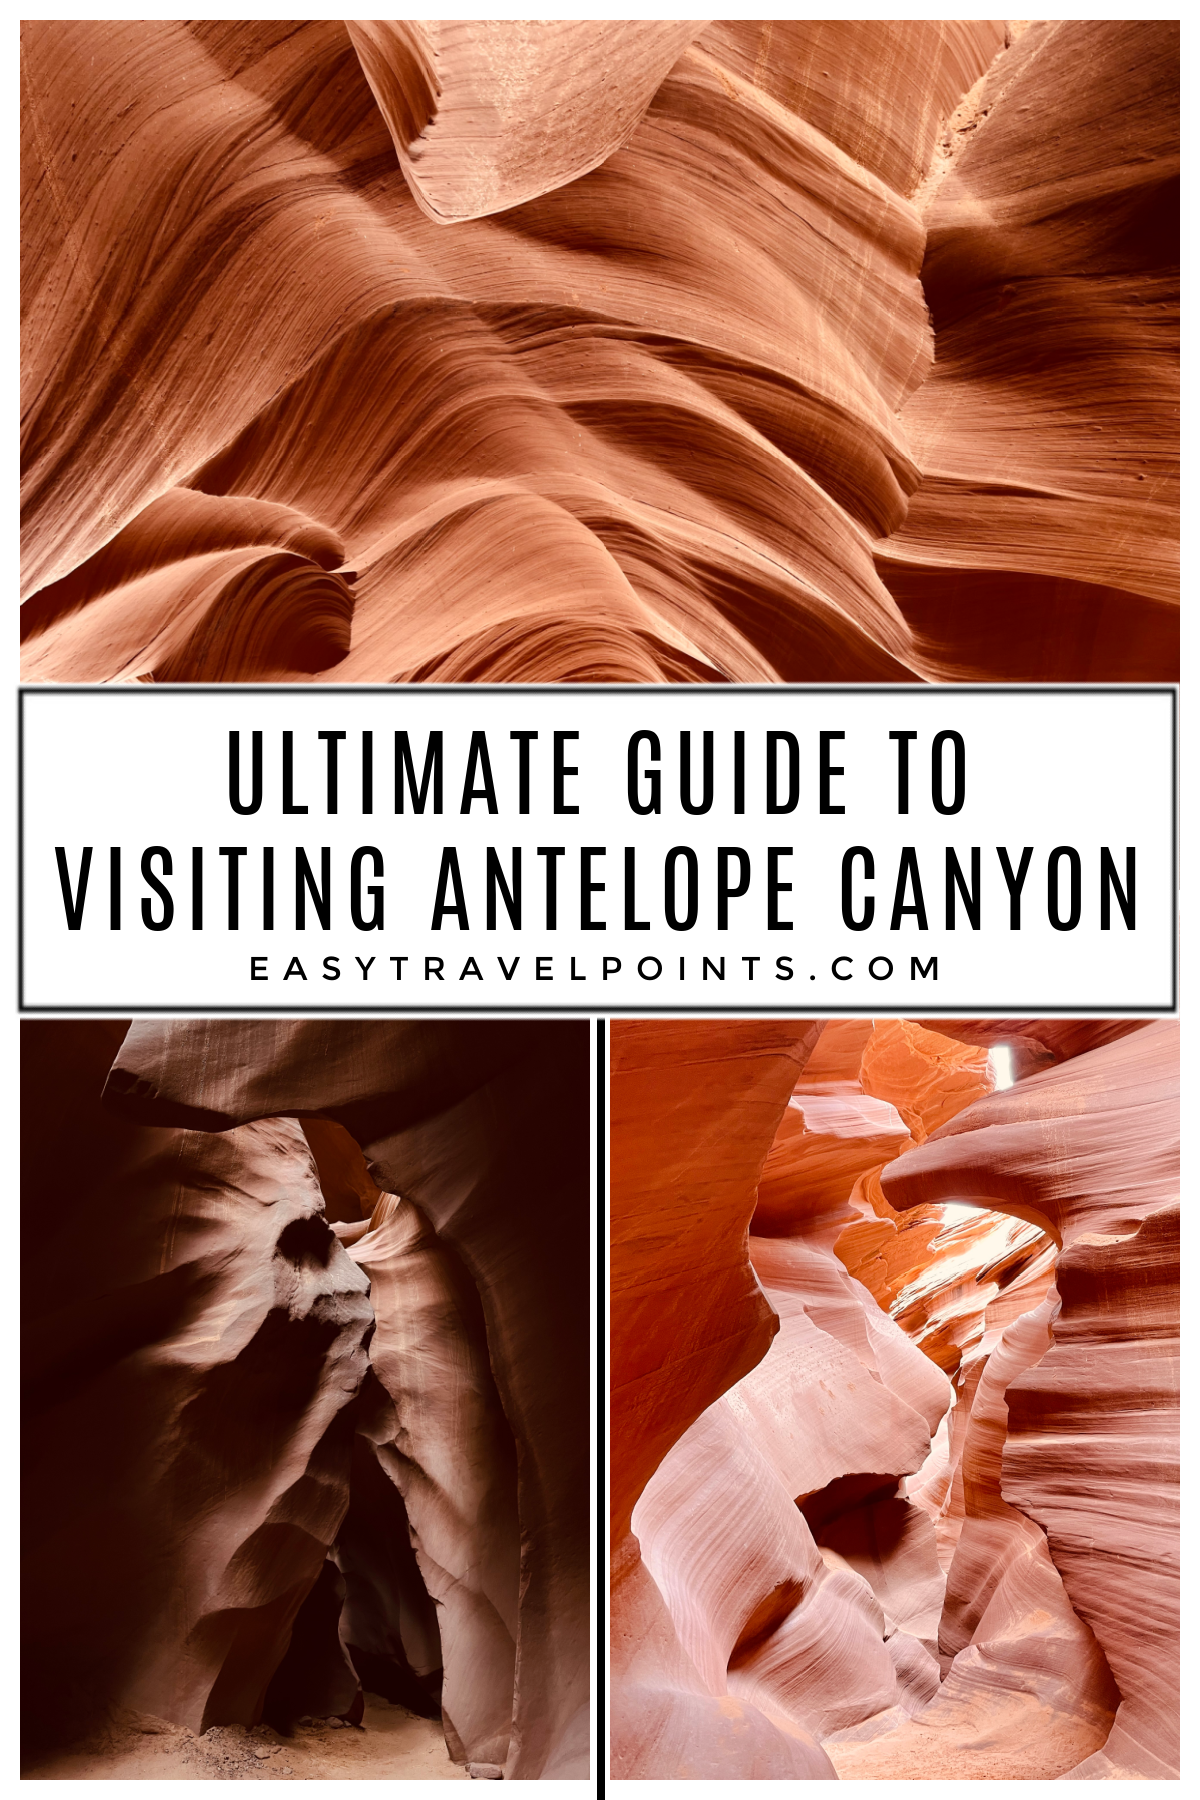 This guide will show you how to plan the perfect trip to Antelope Canyon in Page, Arizona. From how to book your tour, to where you can stay and how to save money doing it all. Antelope canyon is perfect for families, couples and solo travelers. It's a bucket list location that you'll never forget.